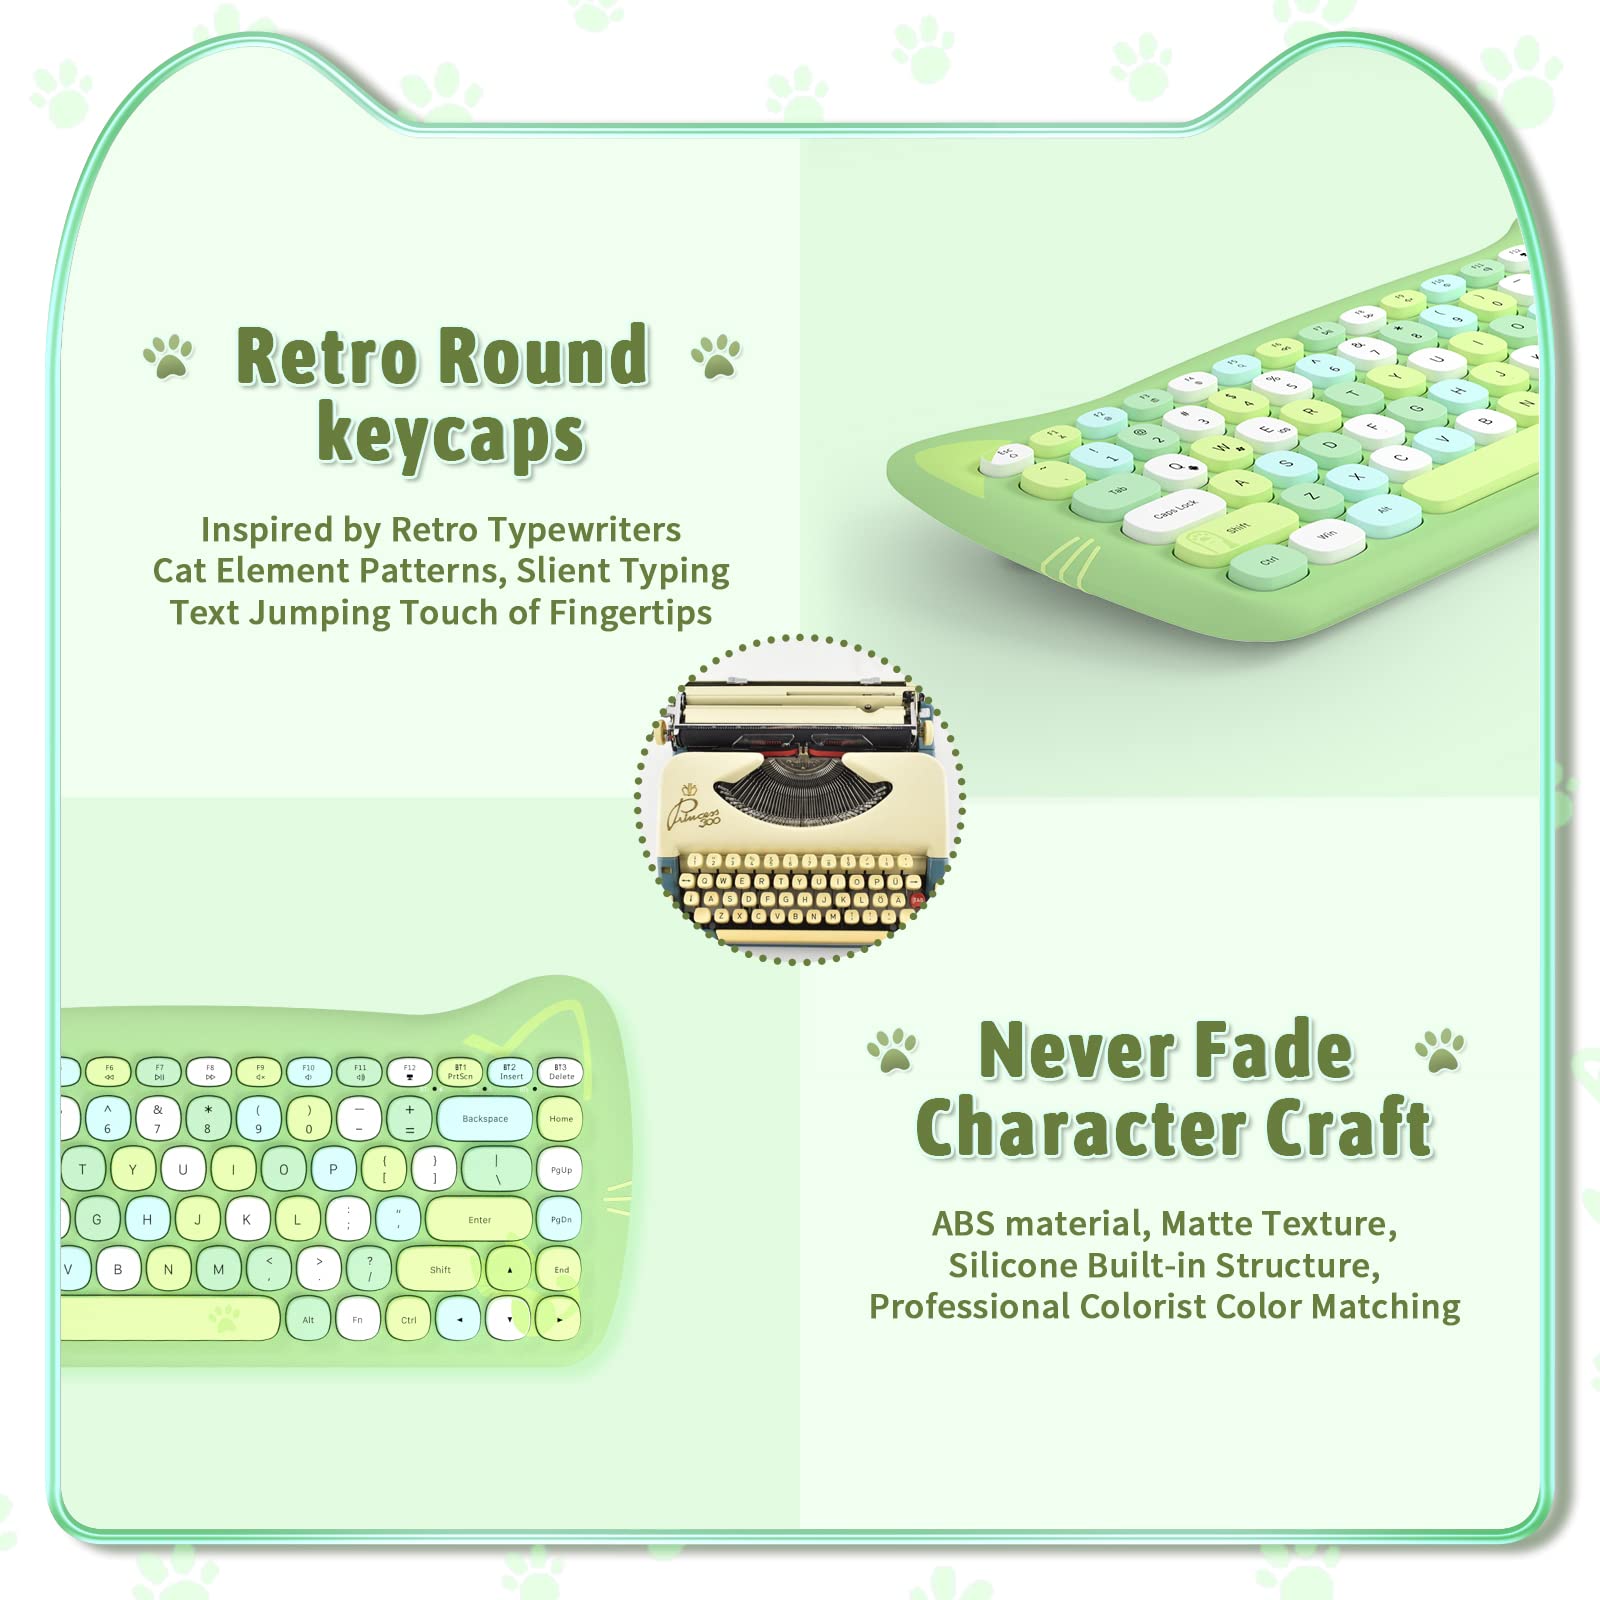 SELORSS Kawaii Wireless Bluetooth Cute Cat Keyboard,Mini Portable 84-Key Retro Round Keycaps,Quiet Click for Typewriter, Home and Office,Compatible with PC/Mac/Notebook/Laptop/Ipad Air(Green Colorful)